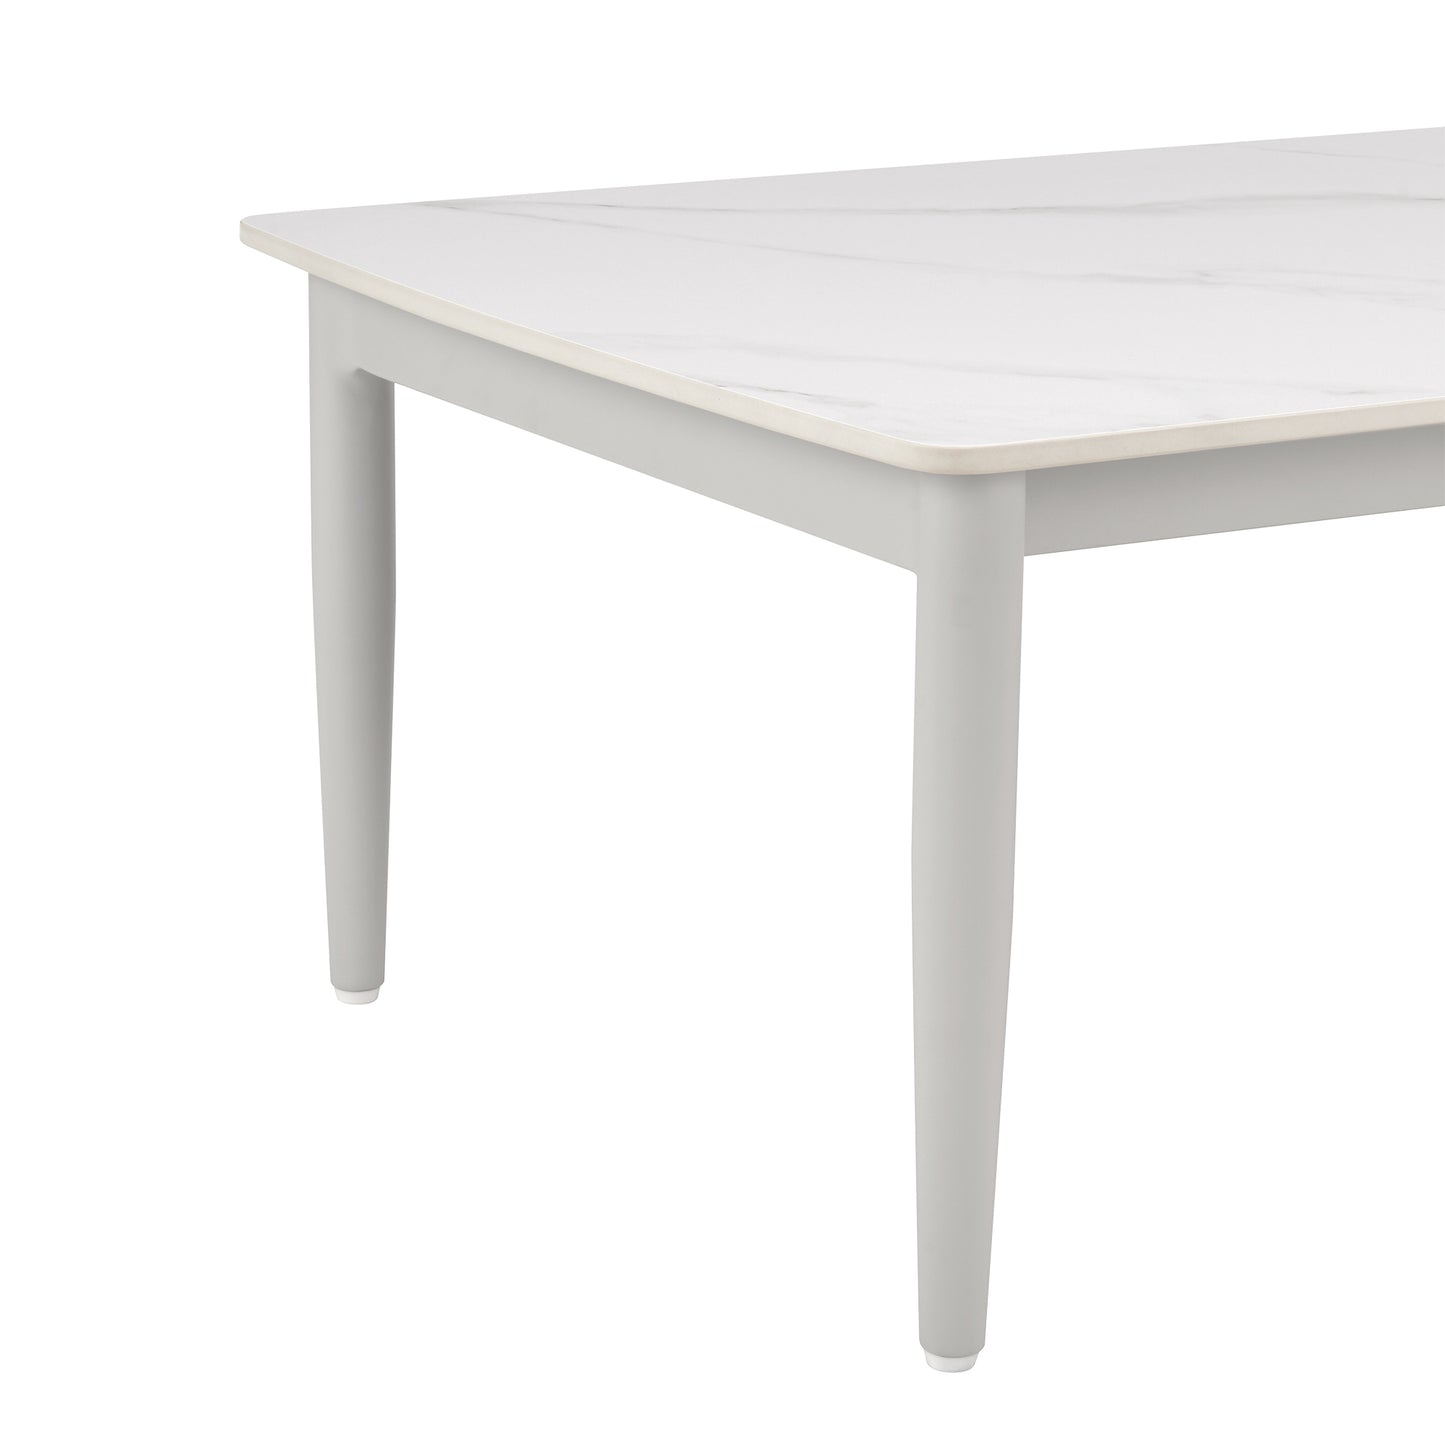 Rhodes Outdoor Patio Rectangular Coffee Table in Snowy Sintered Stone and Porcelain Finish